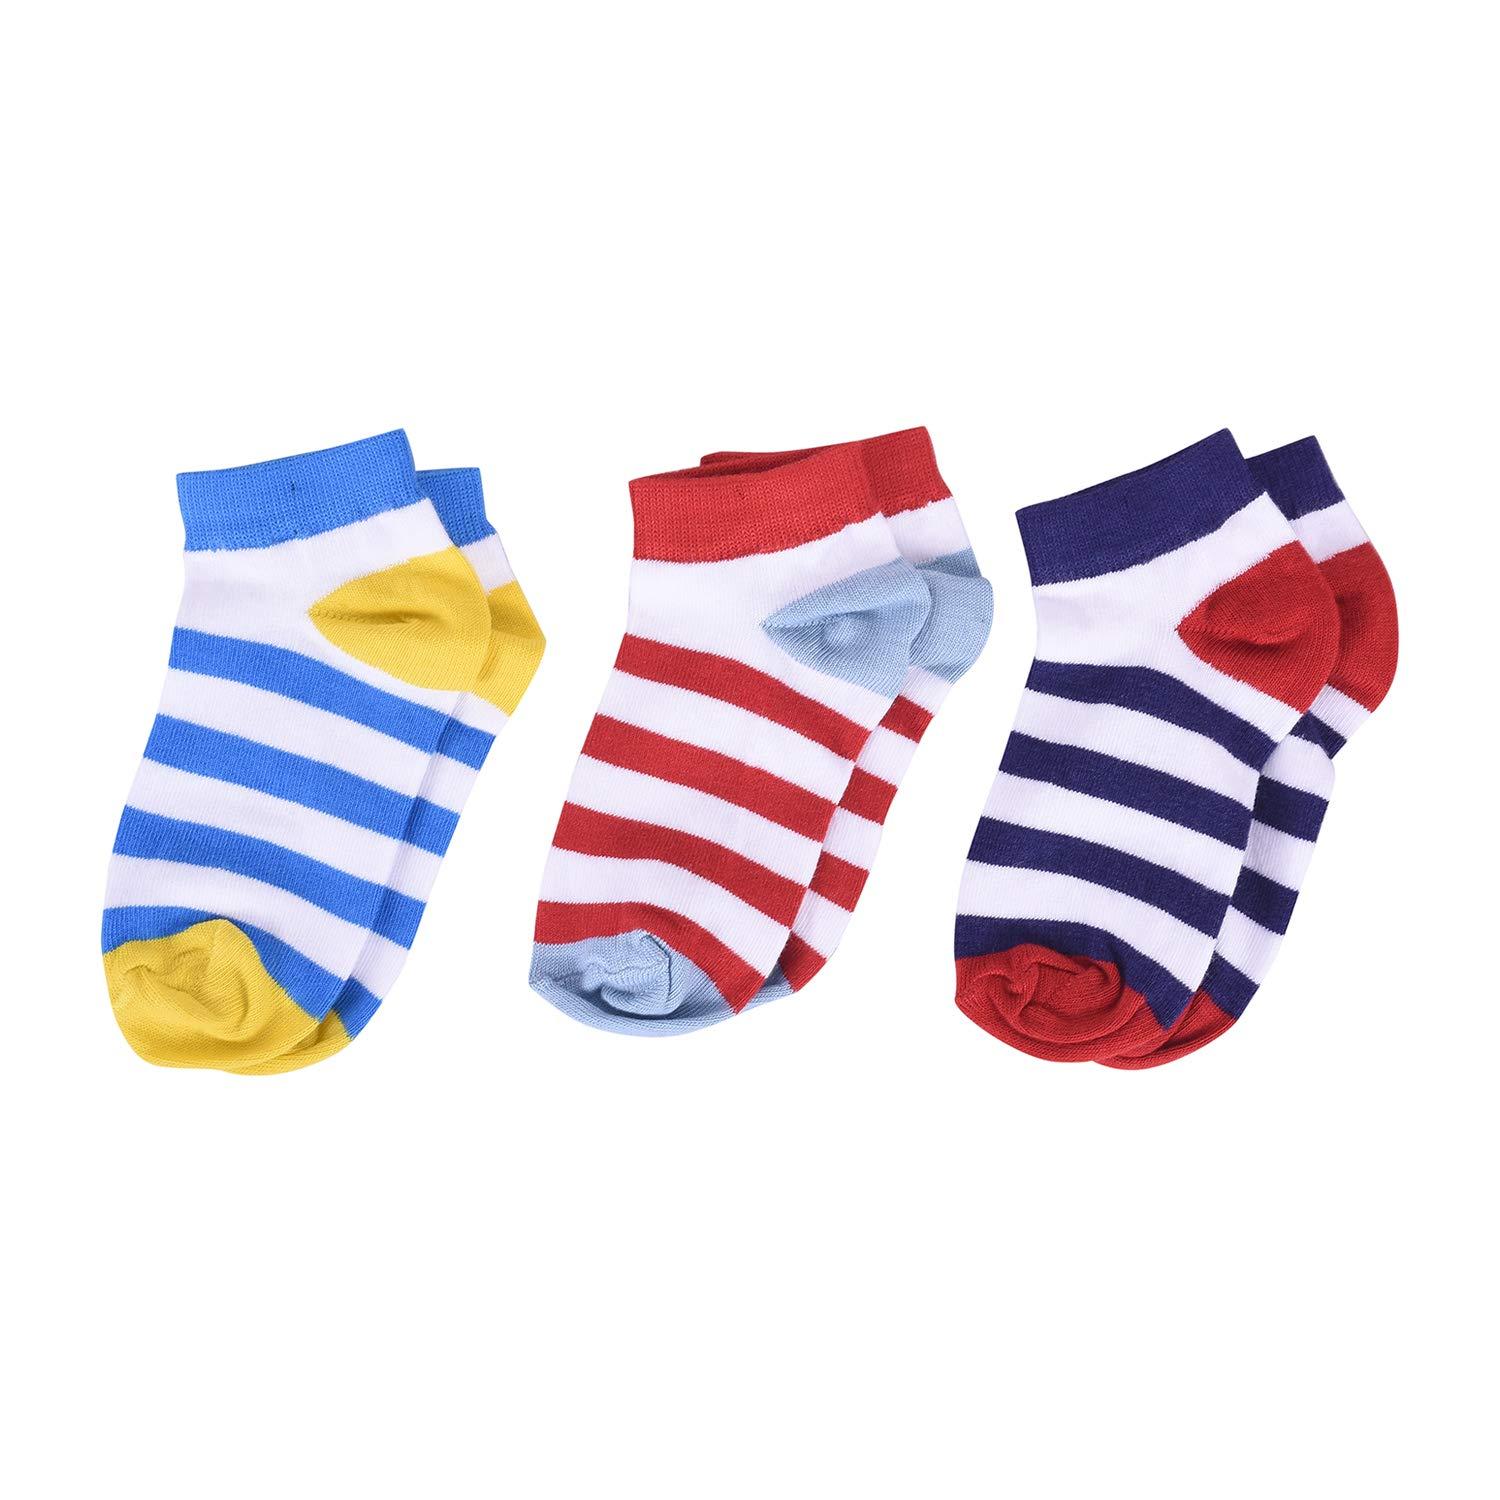 FOOTPRINTS Organic cotton Baby Socks-12-30 Months - Pack of 6 Pairs -New Stripes and Star